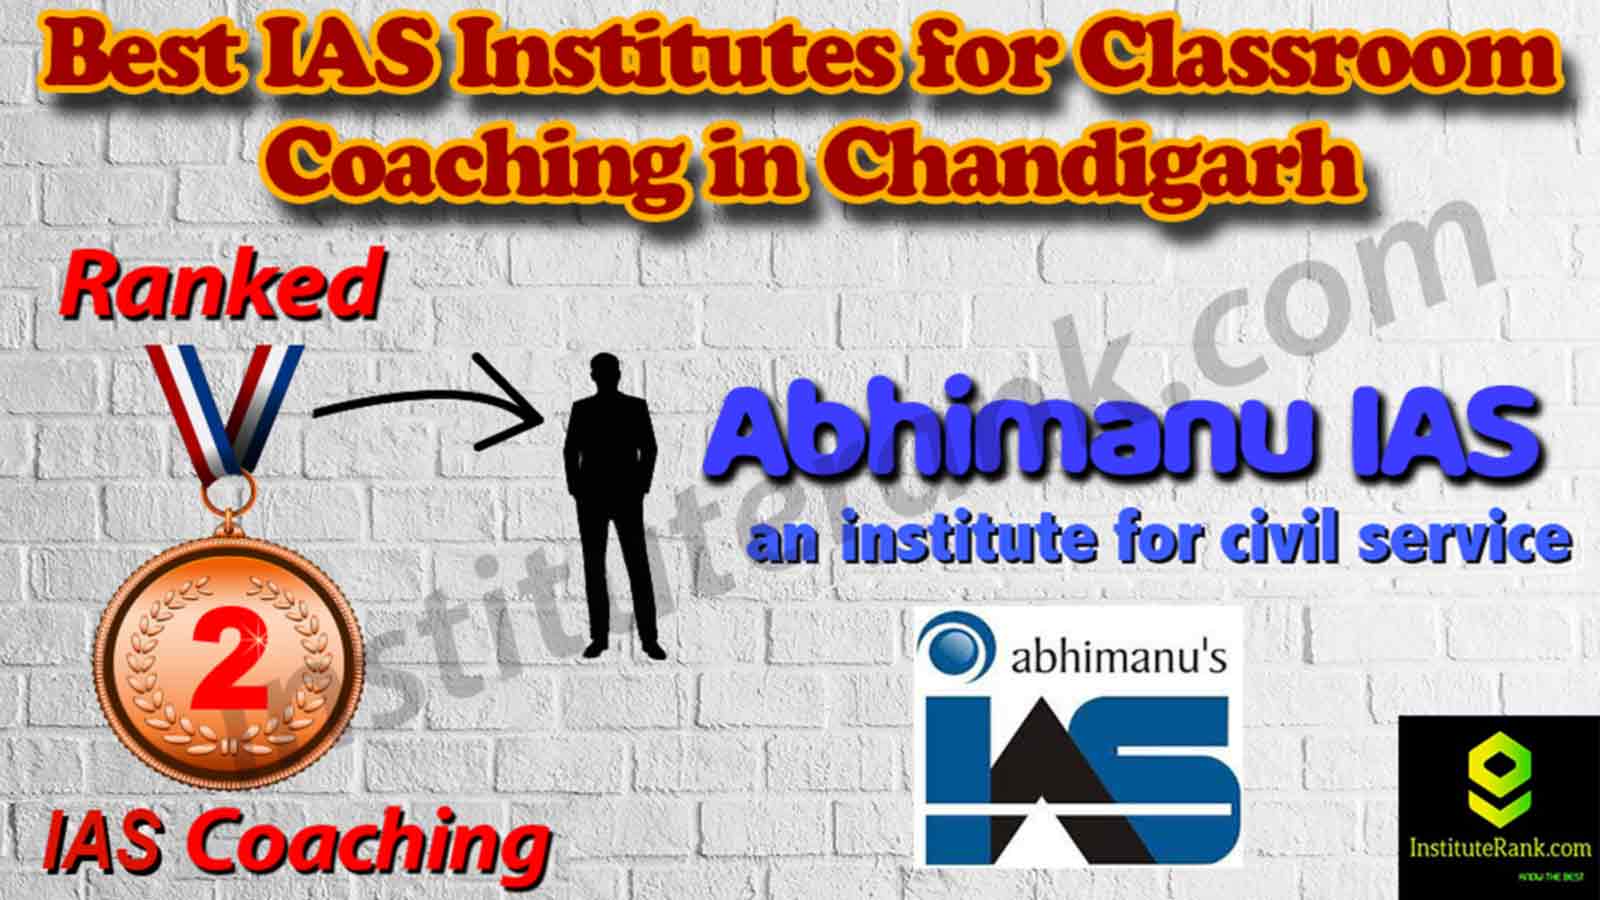 Top IAS Coaching and fees in Chandigarh